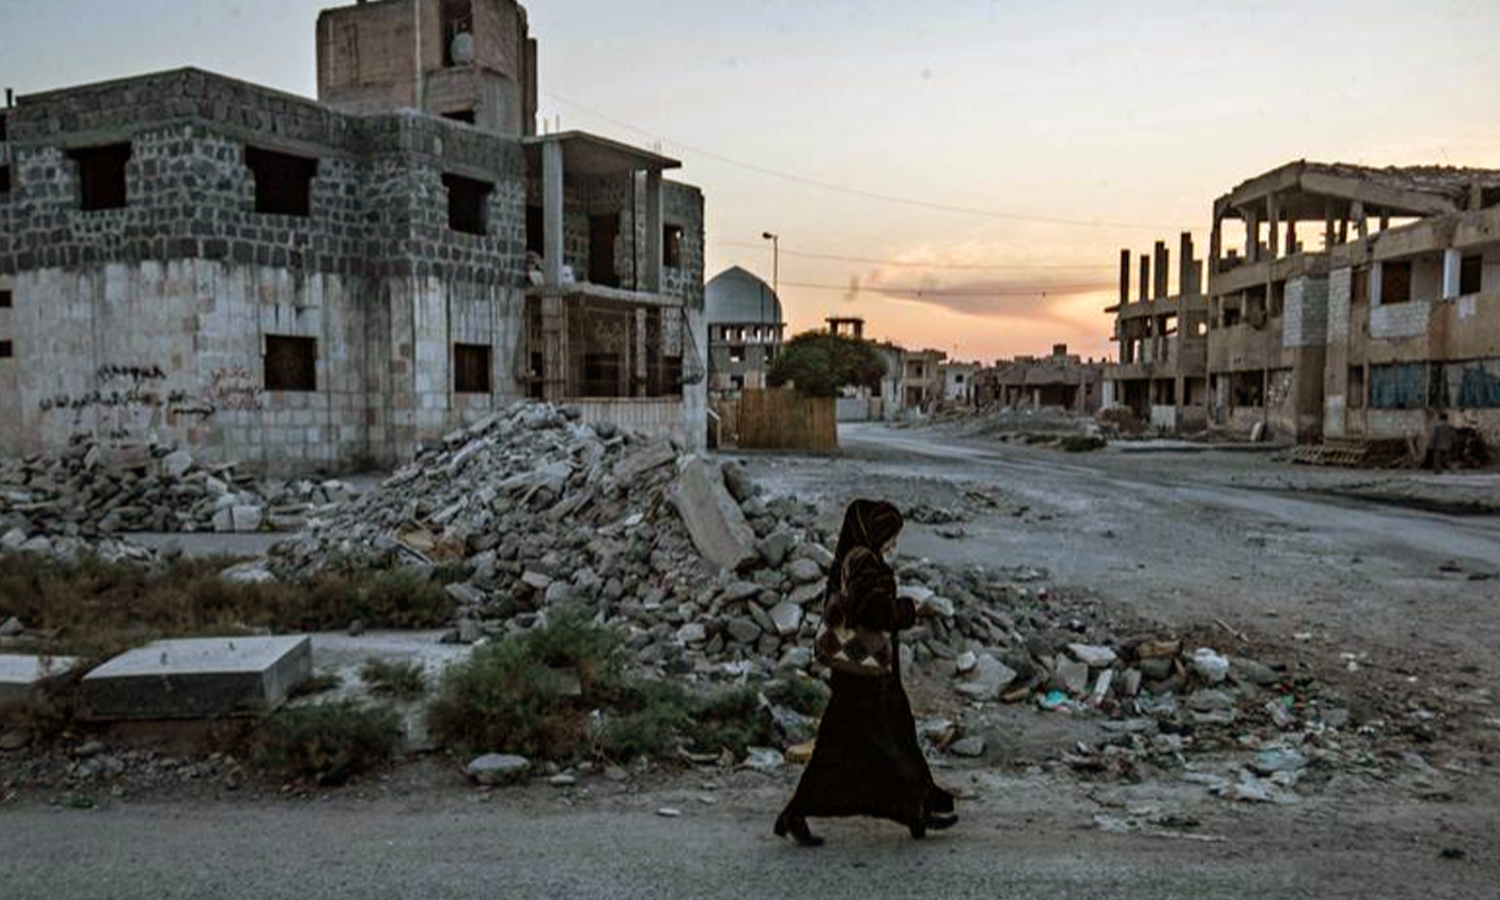 A Syrian woman walking in one of the destroyed streets of Raqqa as a result of the military battles with the Islamic State group in 2017 - 4 February 2022 (The National News)